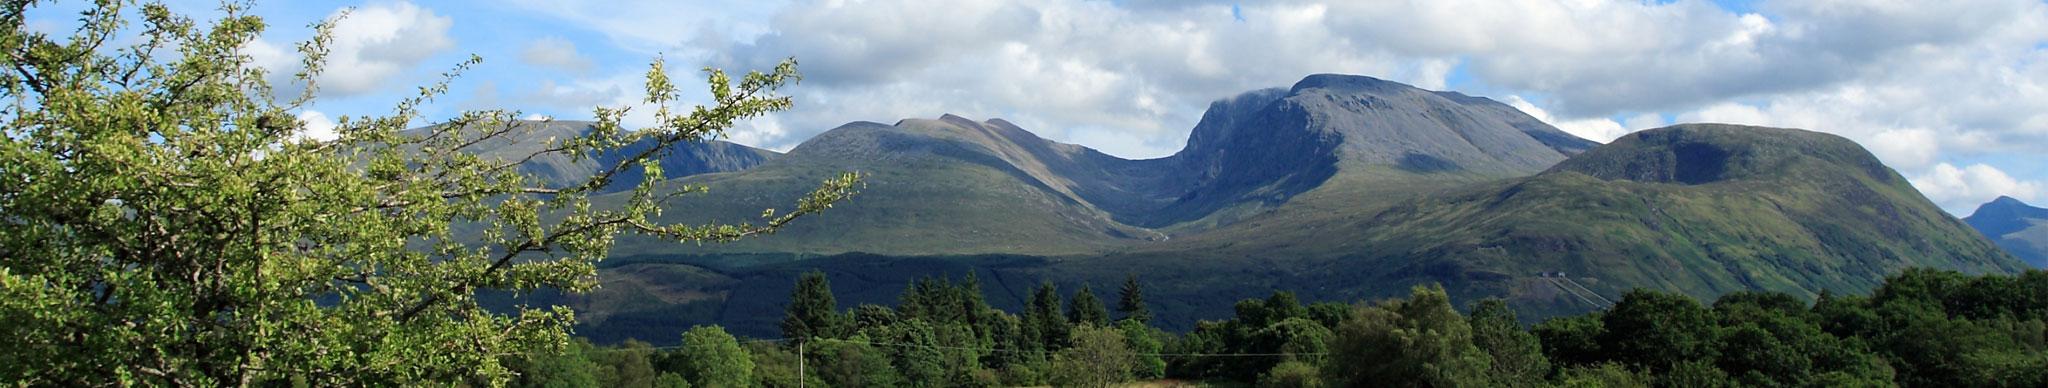 Reaching new heights: Ben Nevis is now officially 1345m tall banner image